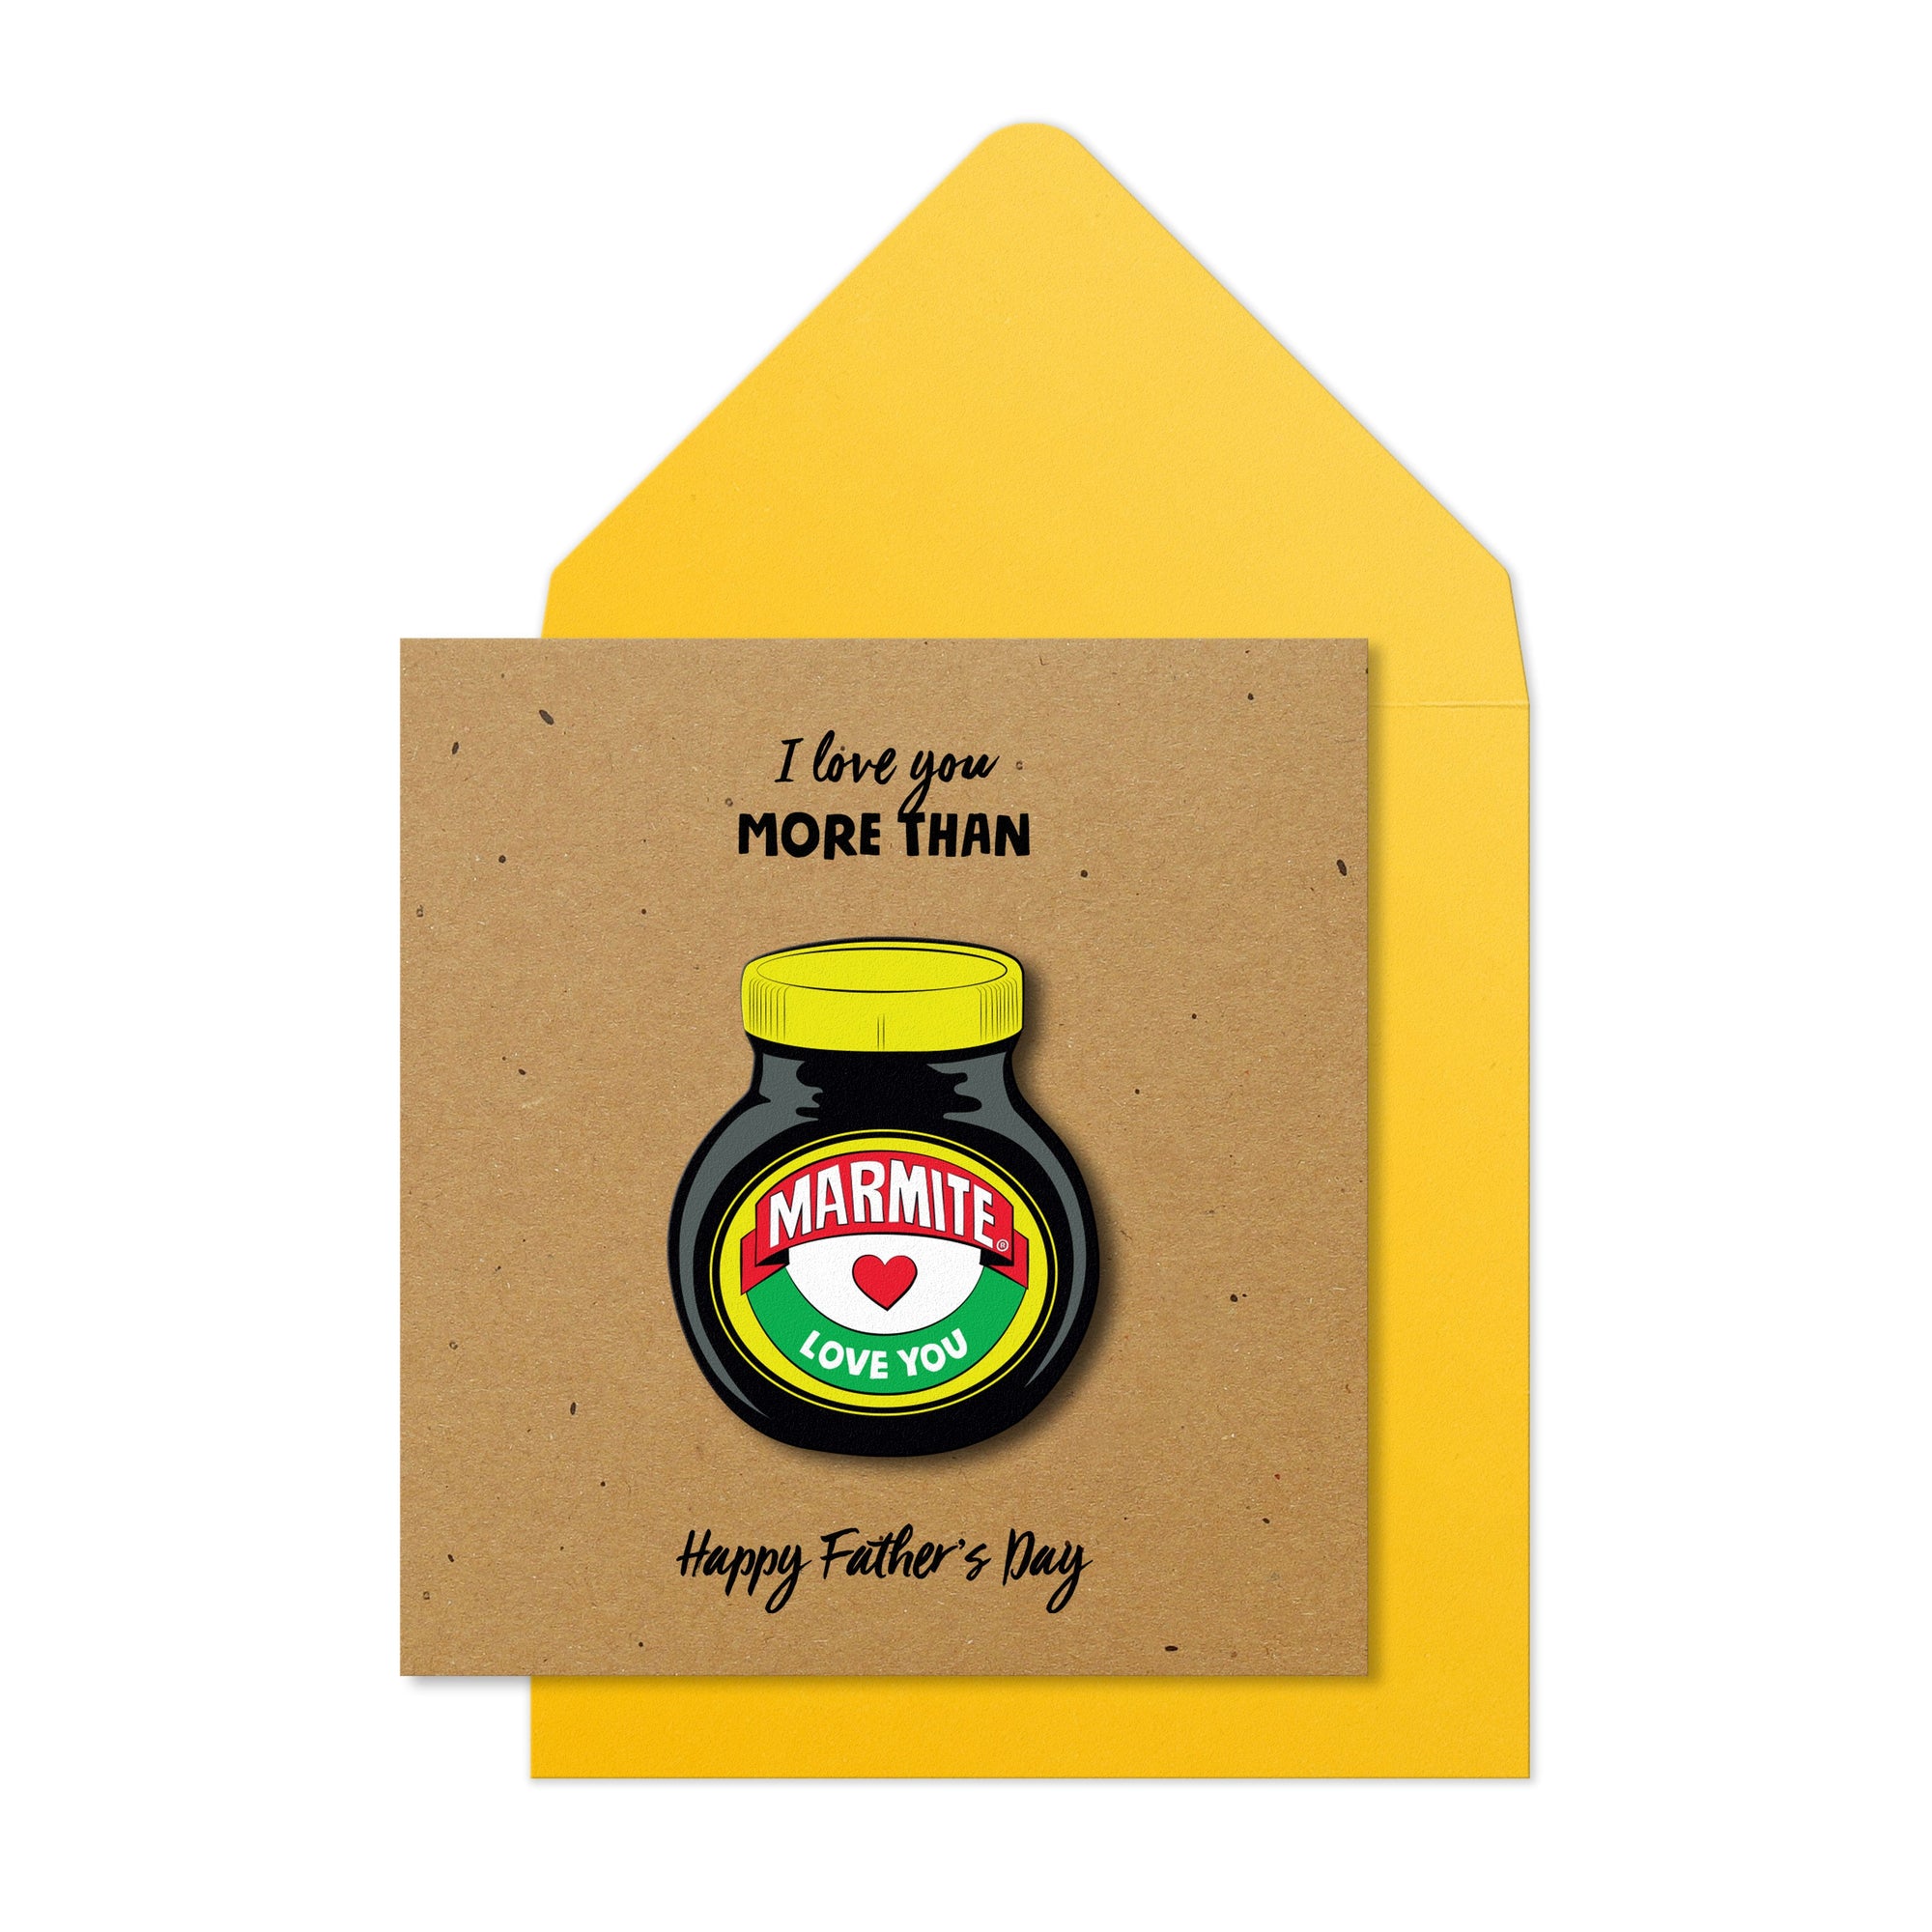 Father's Day - I love you more than Marmite!